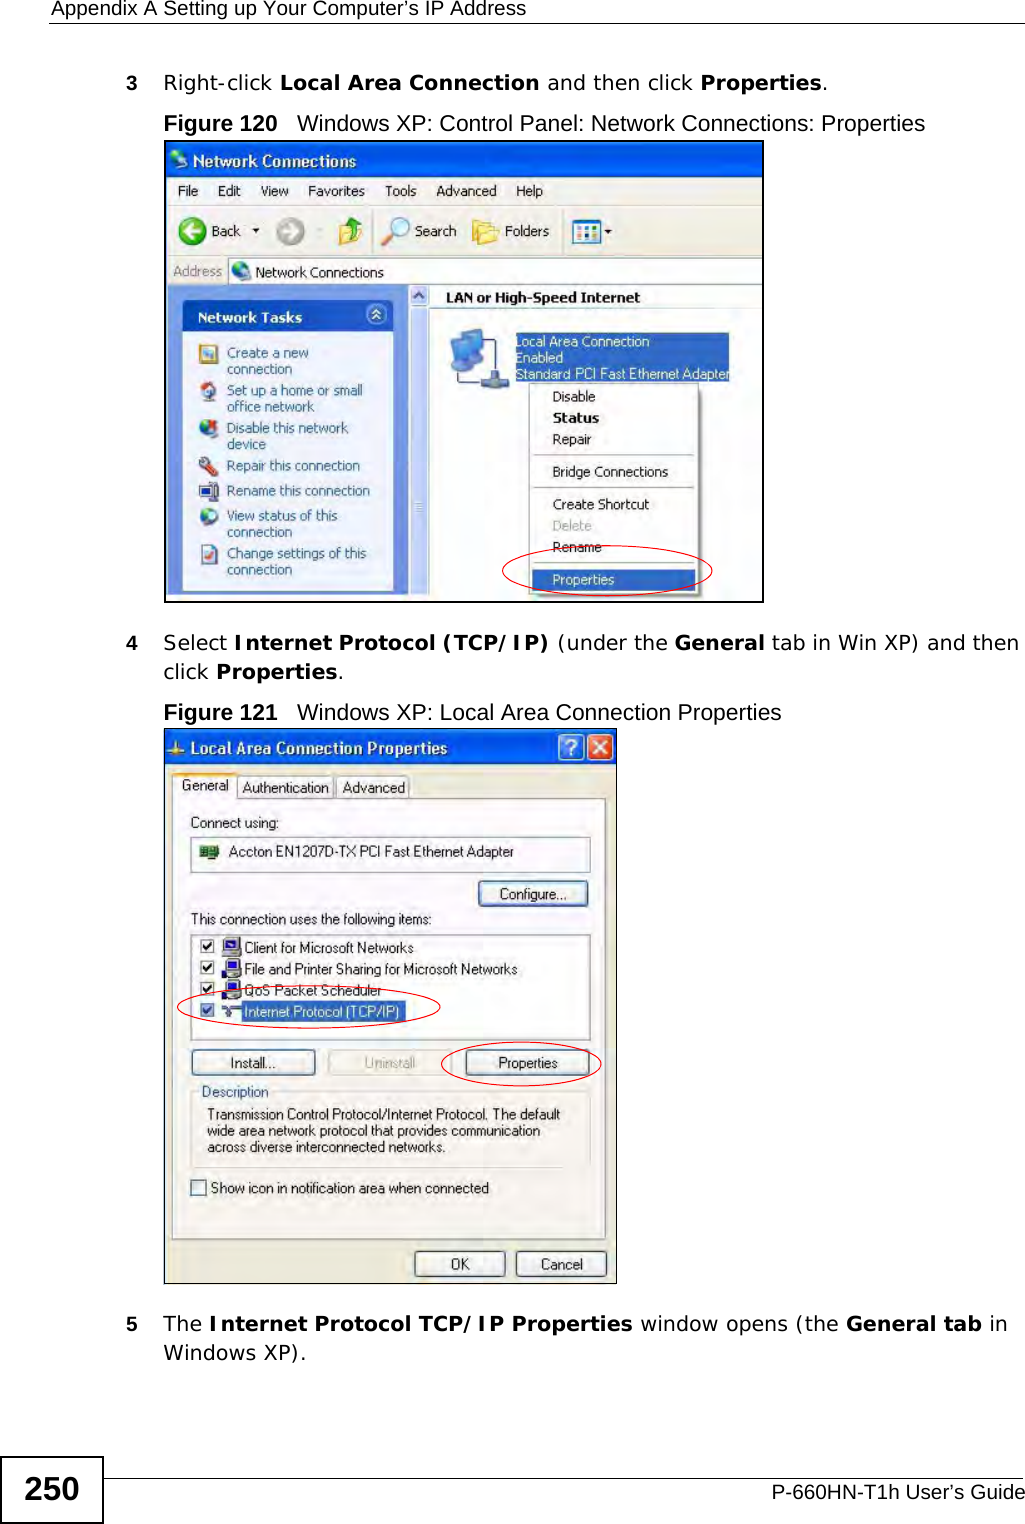 Appendix A Setting up Your Computer’s IP AddressP-660HN-T1h User’s Guide2503Right-click Local Area Connection and then click Properties.Figure 120   Windows XP: Control Panel: Network Connections: Properties4Select Internet Protocol (TCP/IP) (under the General tab in Win XP) and then click Properties.Figure 121   Windows XP: Local Area Connection Properties5The Internet Protocol TCP/IP Properties window opens (the General tab in Windows XP).